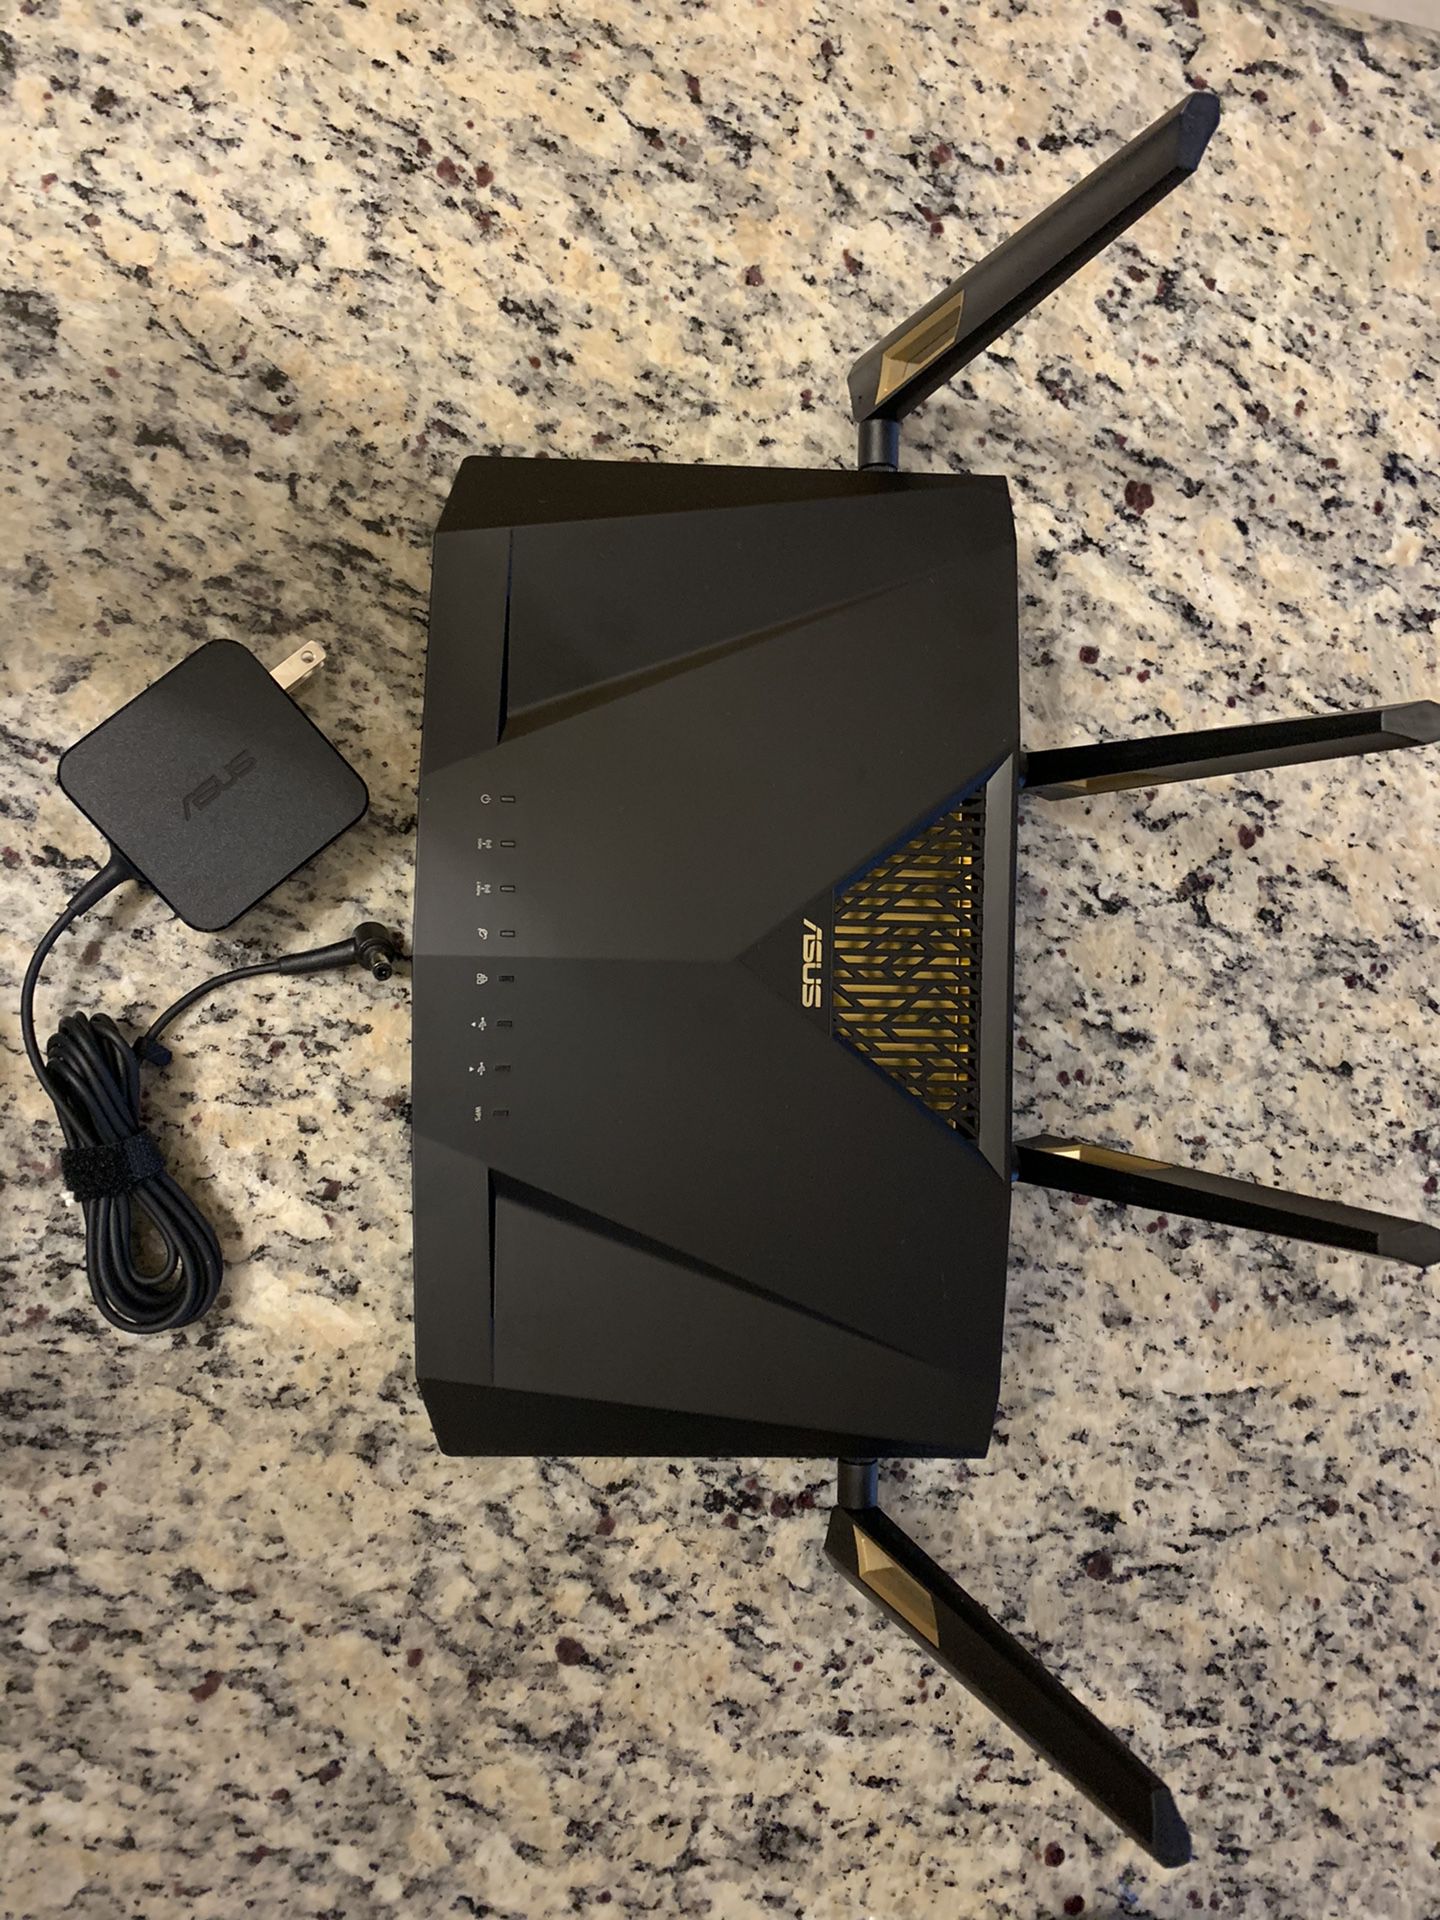 Router Asus RT-AX88U